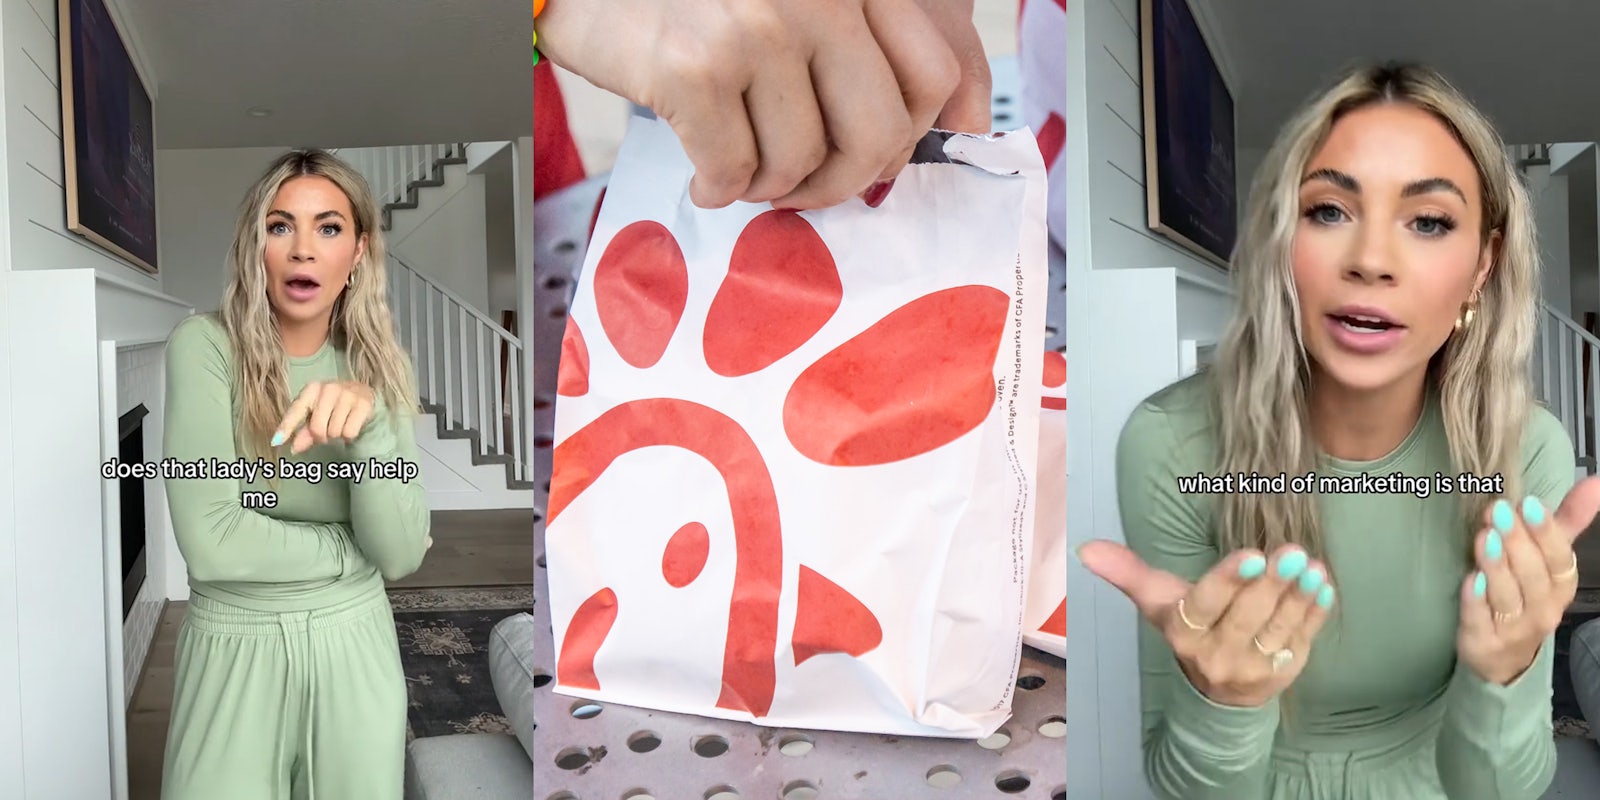 Chick-fil-A customer speaking with caption 'does that lady's bag say help me' (l) hand holding Chick-fil-A bag on metal table (c) Chick-fil-A customer speaking with caption 'what kind of marketing is that' (r)